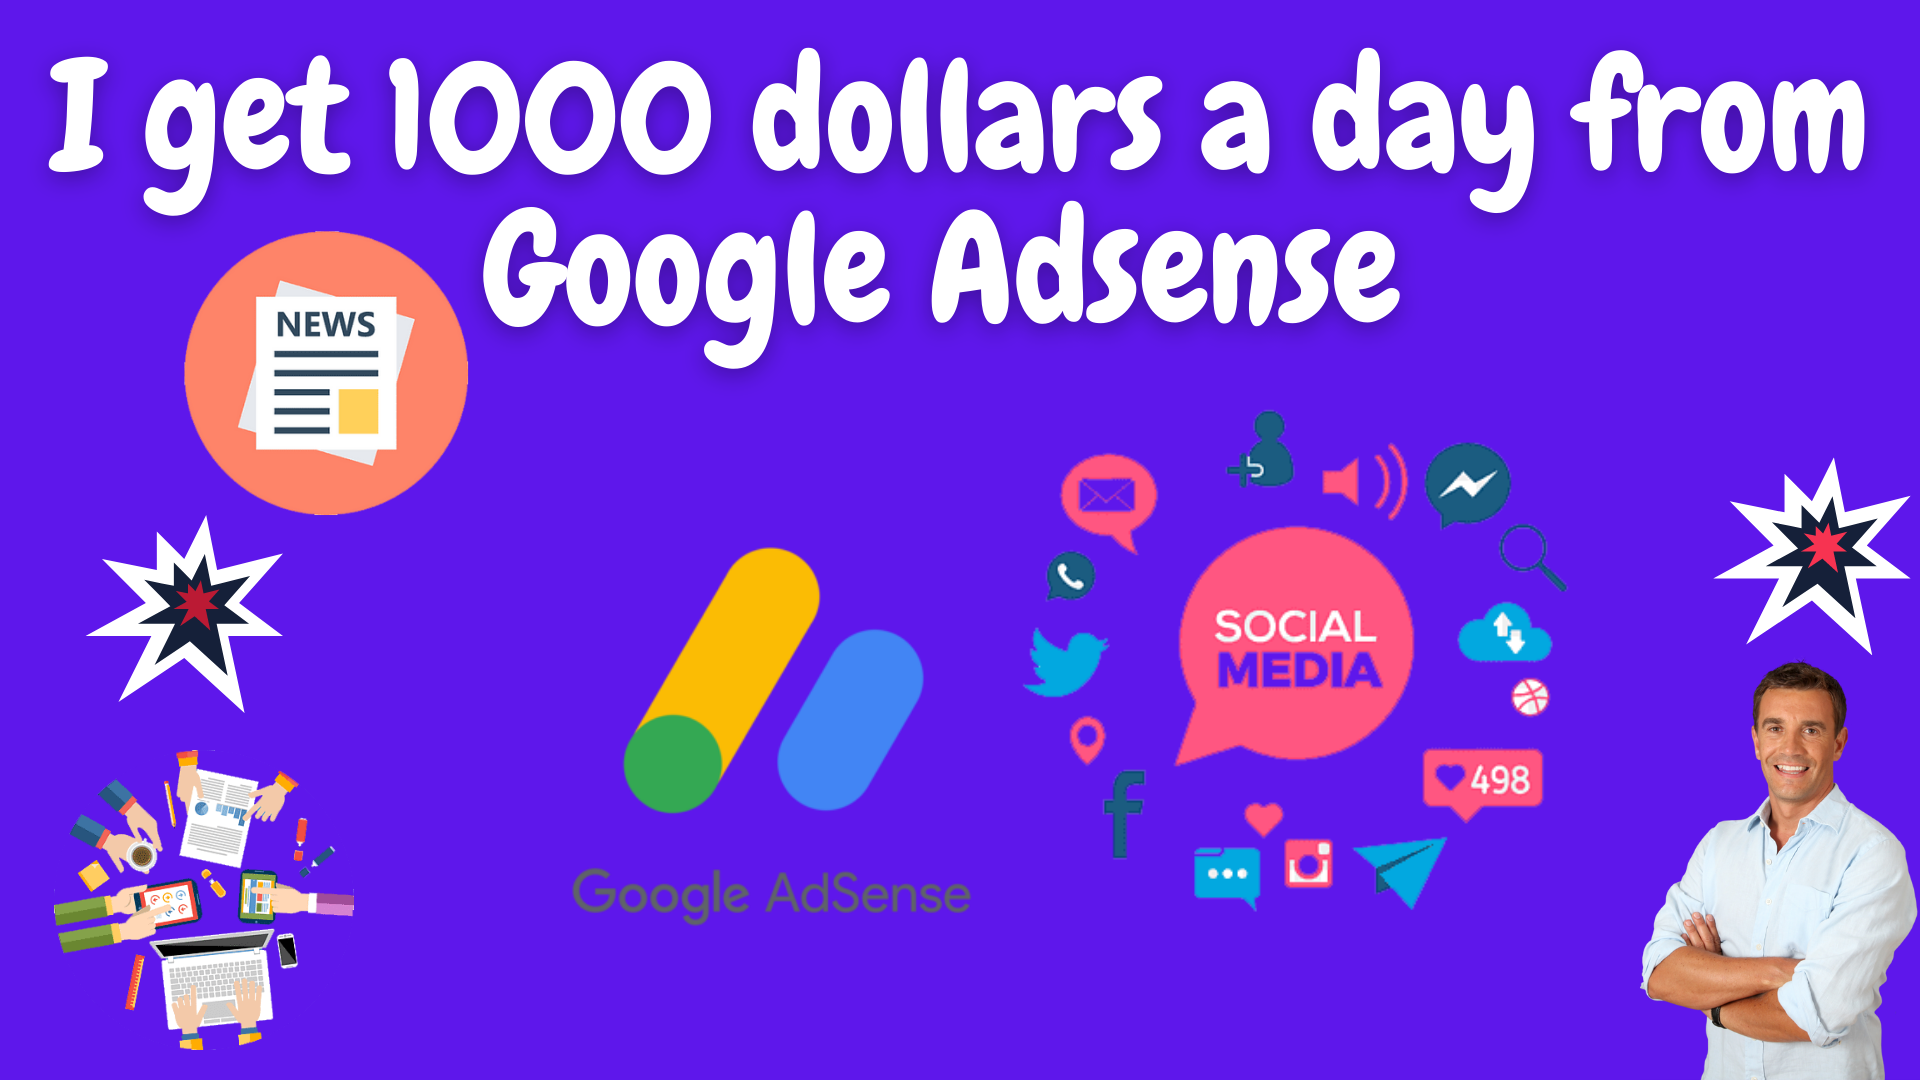 I get 1000 dollars a day from google adsense 